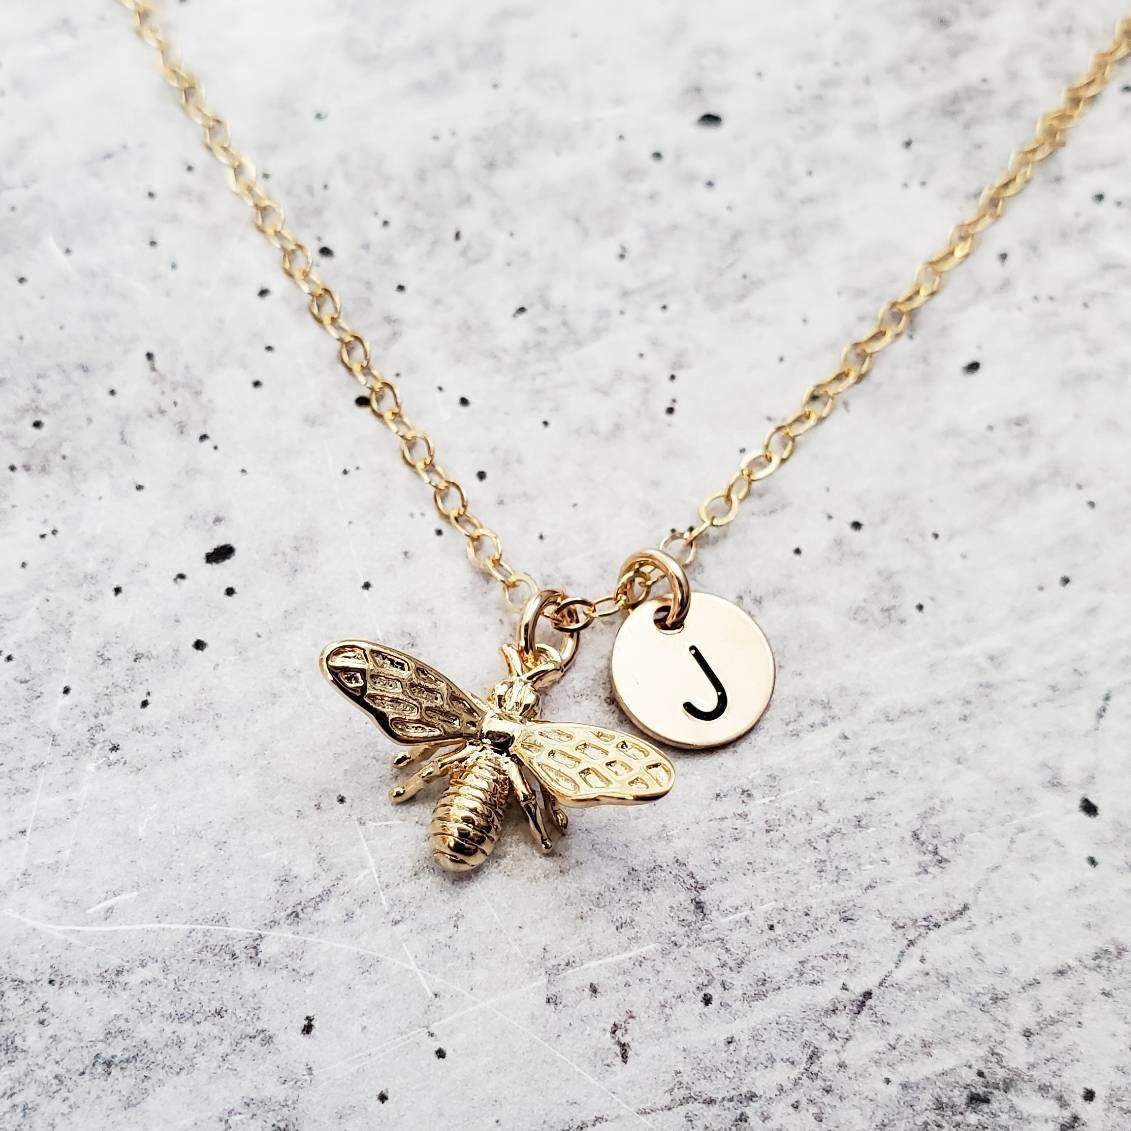 Dainty Bumble Bee Charm Necklace Salt and Sparkle